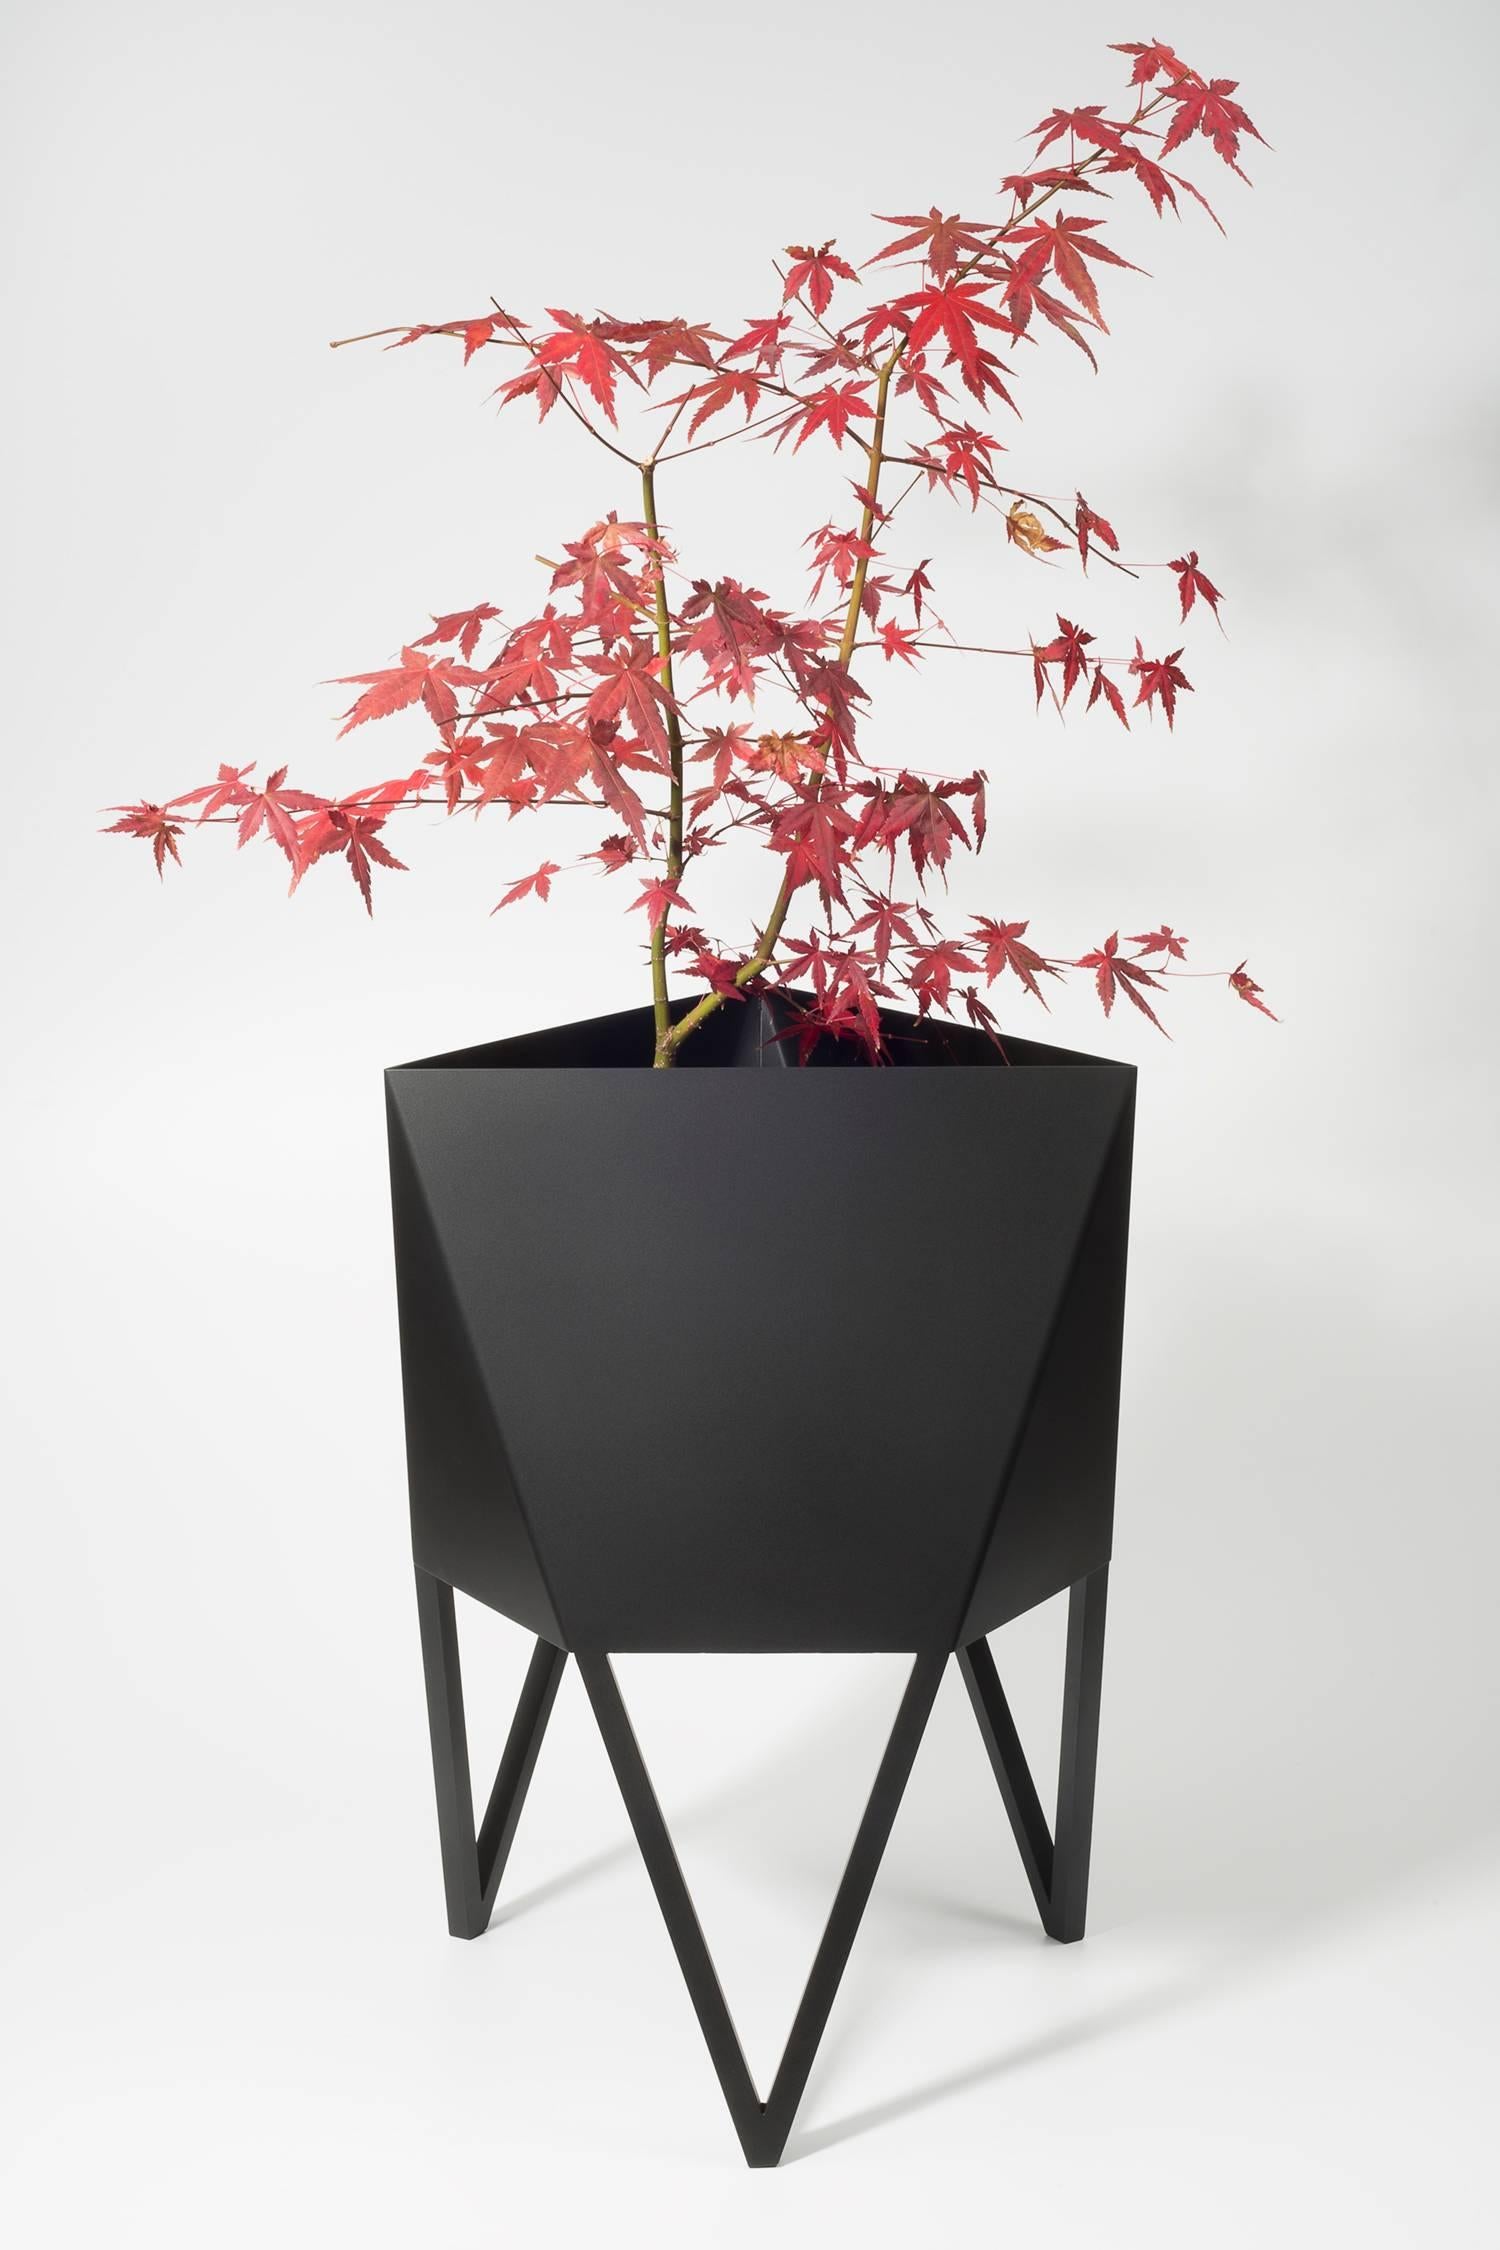 Introducing Force/Collide's signature planter in flat black. Using a seamless brake-forming technique, one sheet of steel is wrapped into a unique geometric pattern that's triangular at the top and hexagonal at the base. Three V-shaped legs